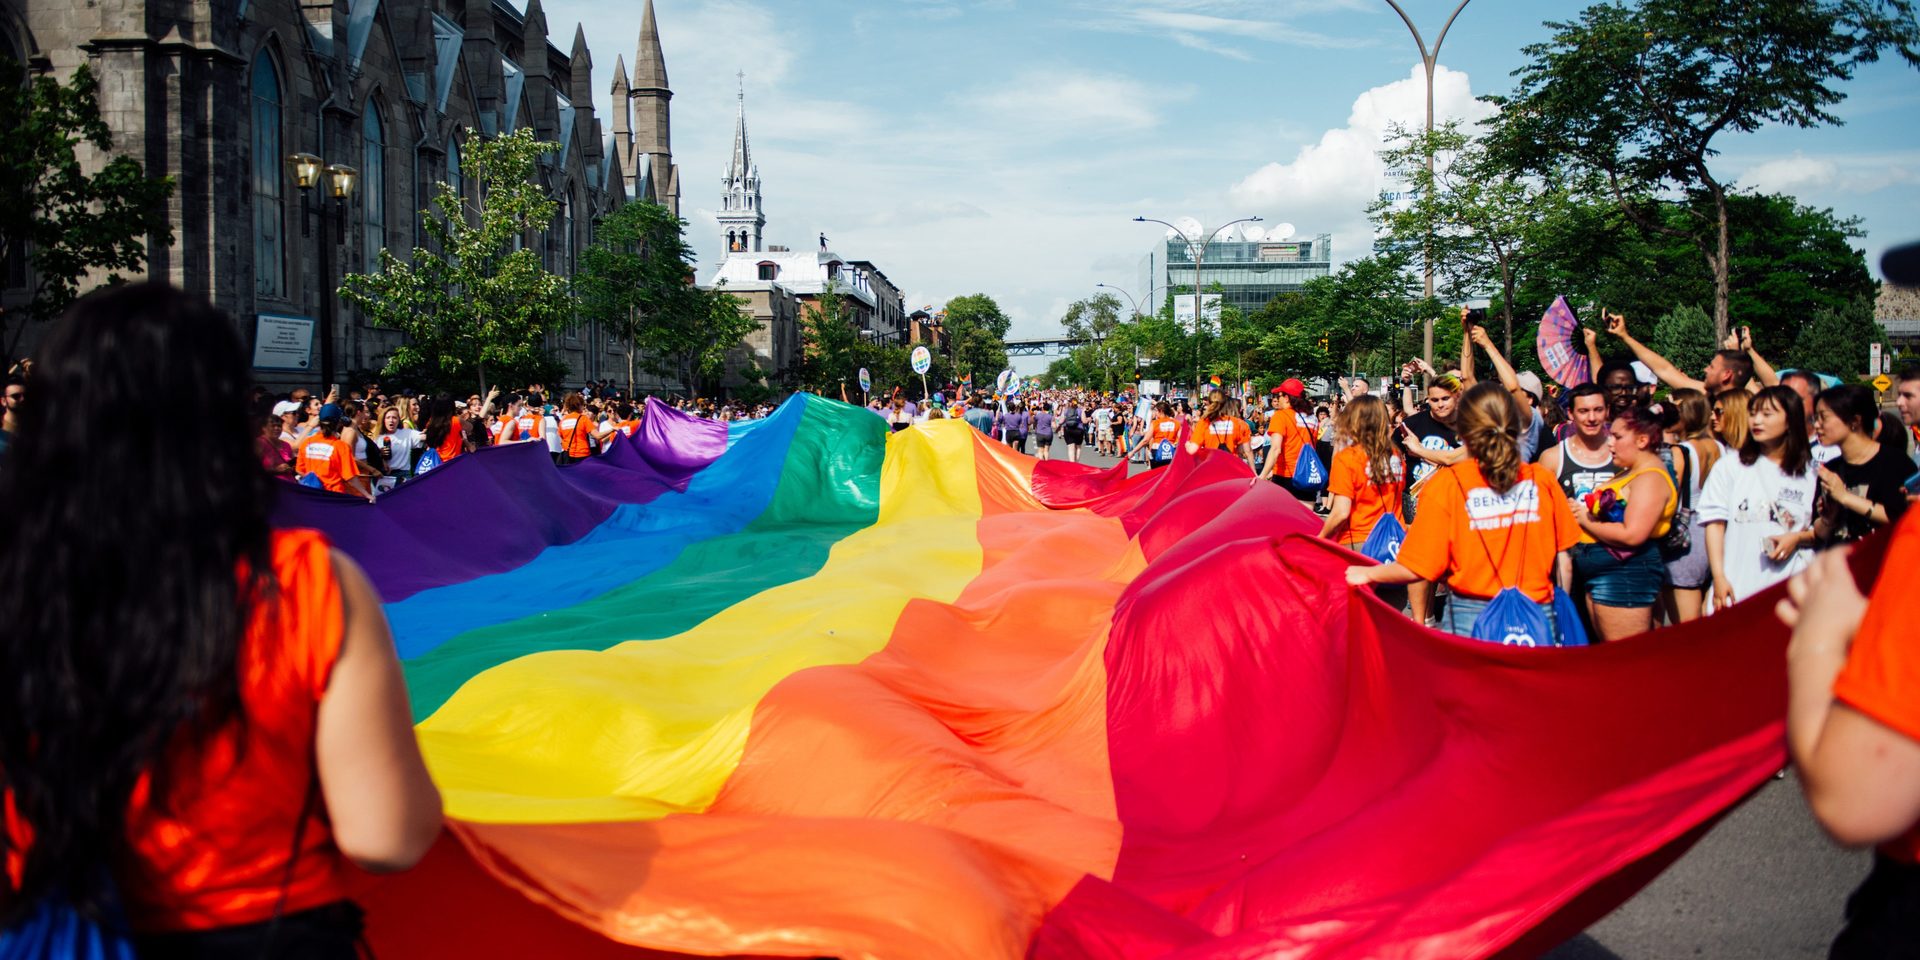 Montreal Host Club - 🏳️‍⚧🏳️‍🌈Happy Pride Day!! 🏳️‍🌈🏳️‍⚧ The MHC is  proudly queer in its essence! Cis, NB, Trans - We gather together to offer  you the entertainment of your dreams! ✨